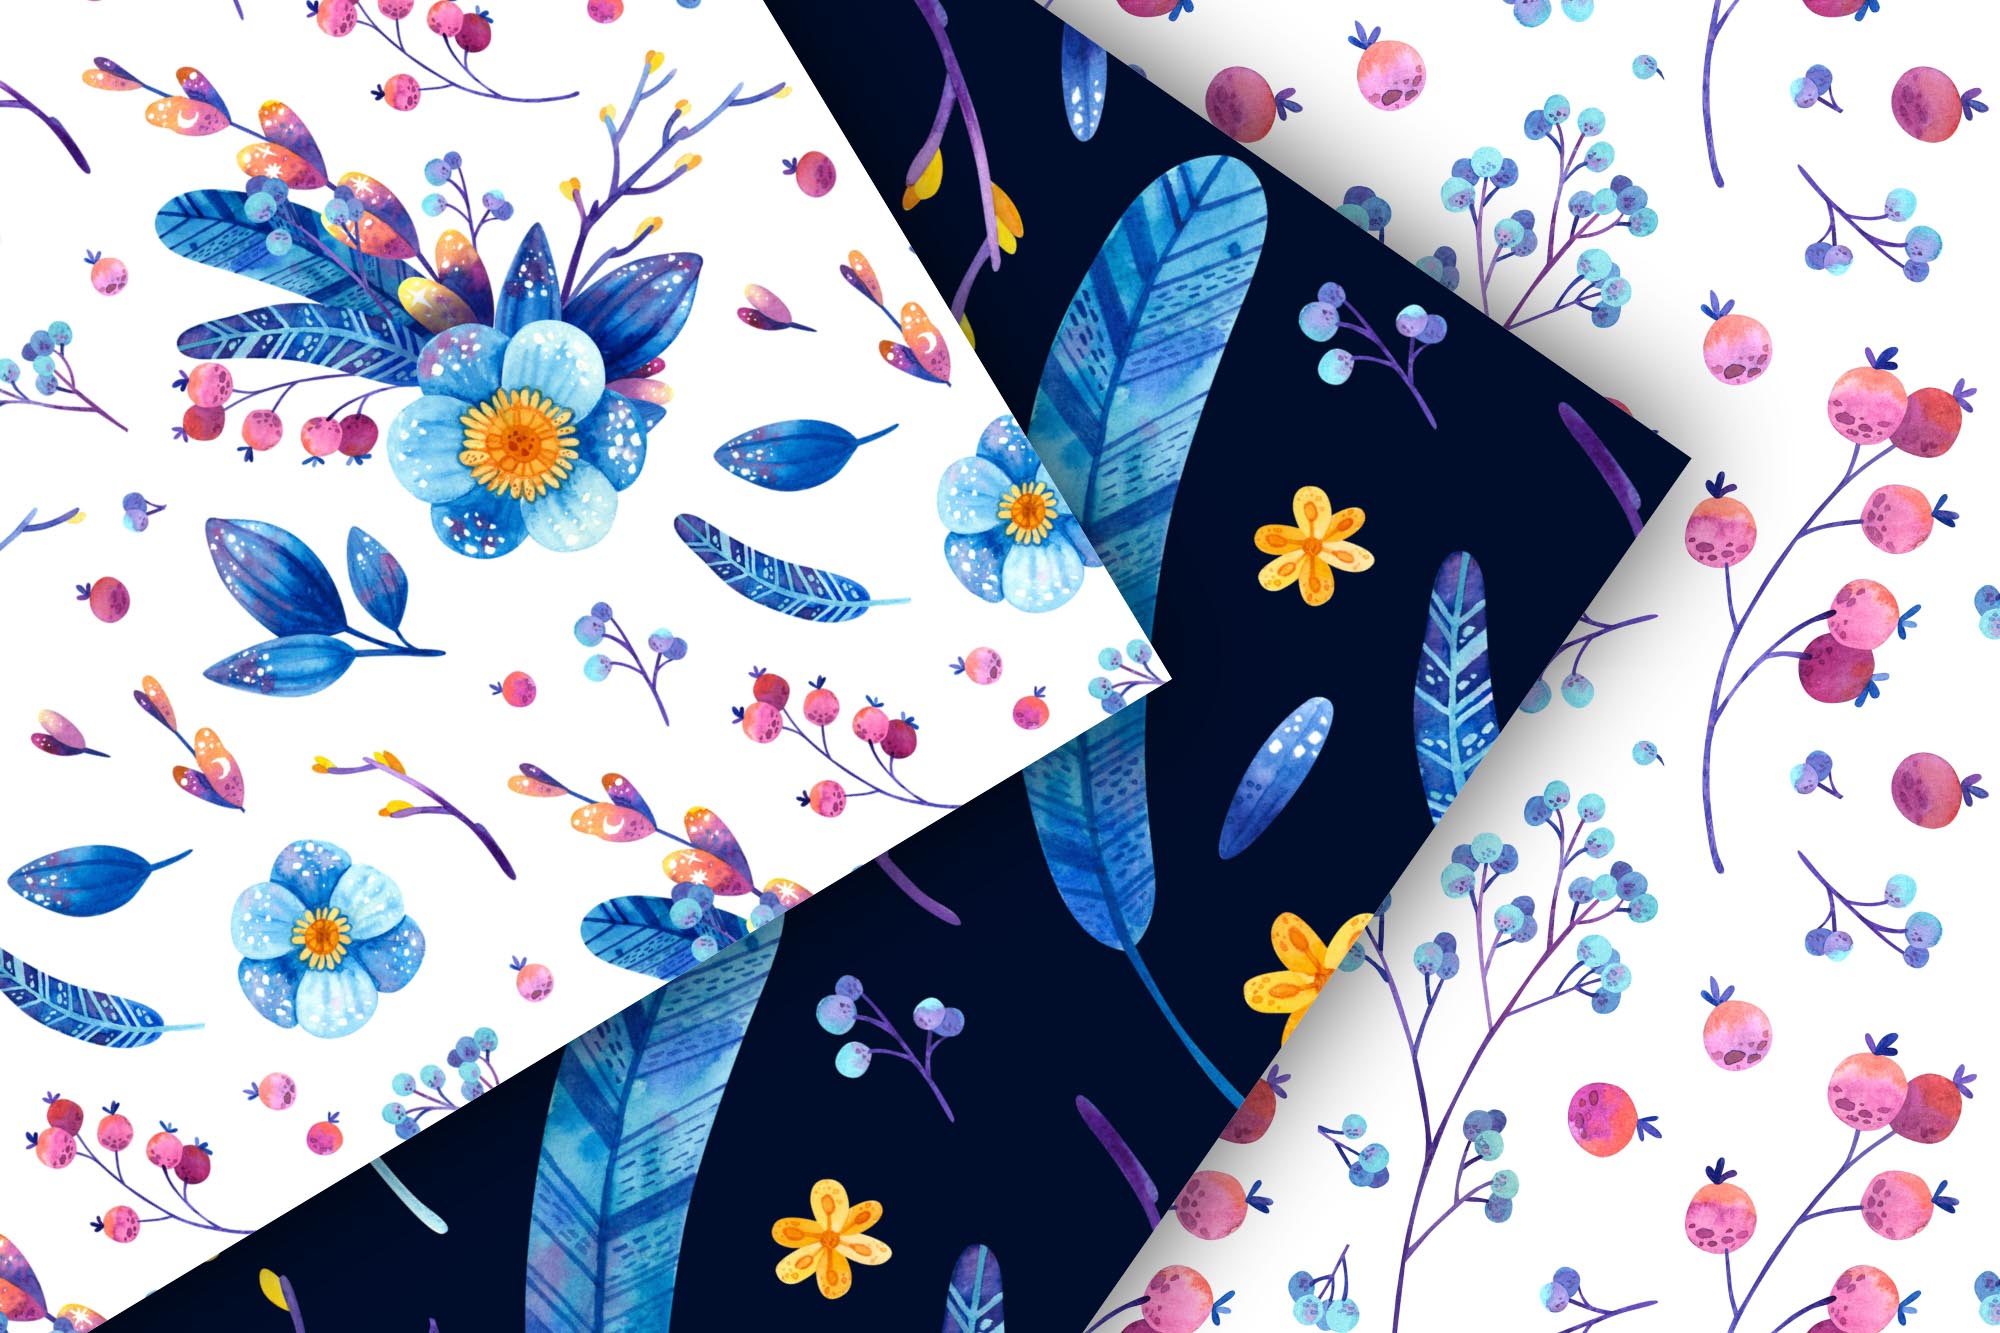 Blue flowers and berries patterns.